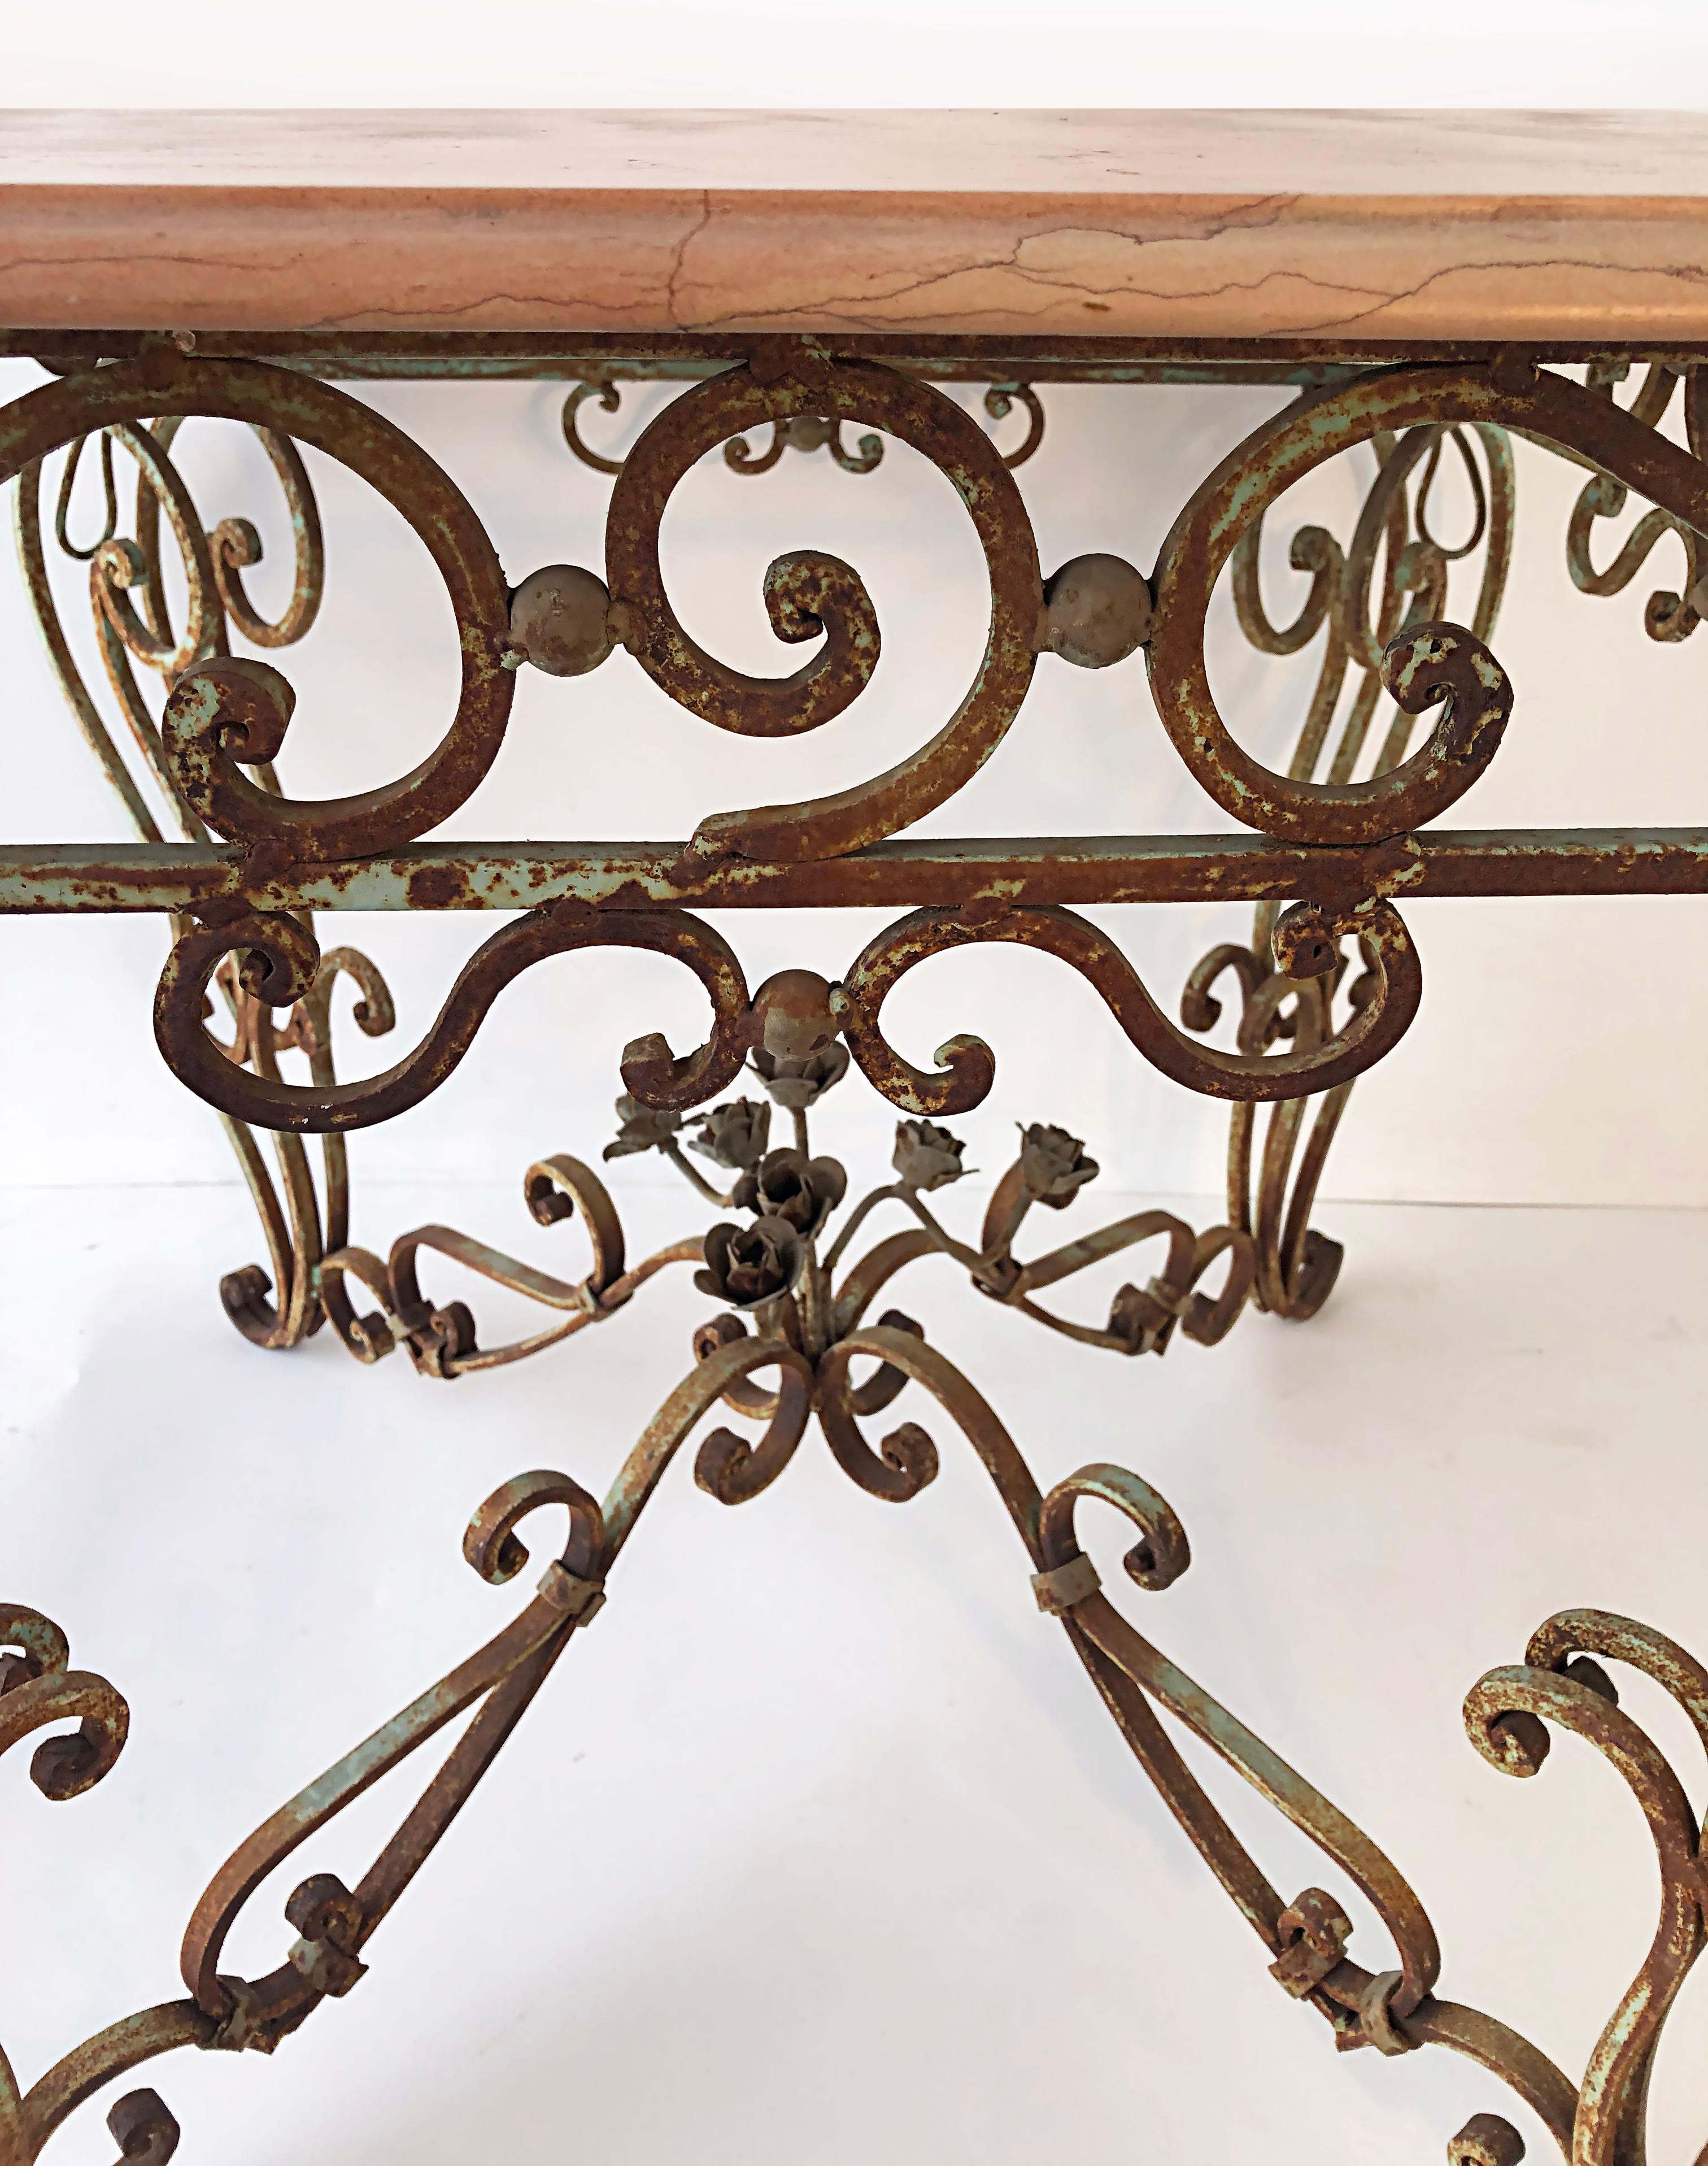 American Vintage Wrought Iron Marble Top Garden Table with Scrollwork and Flowers For Sale